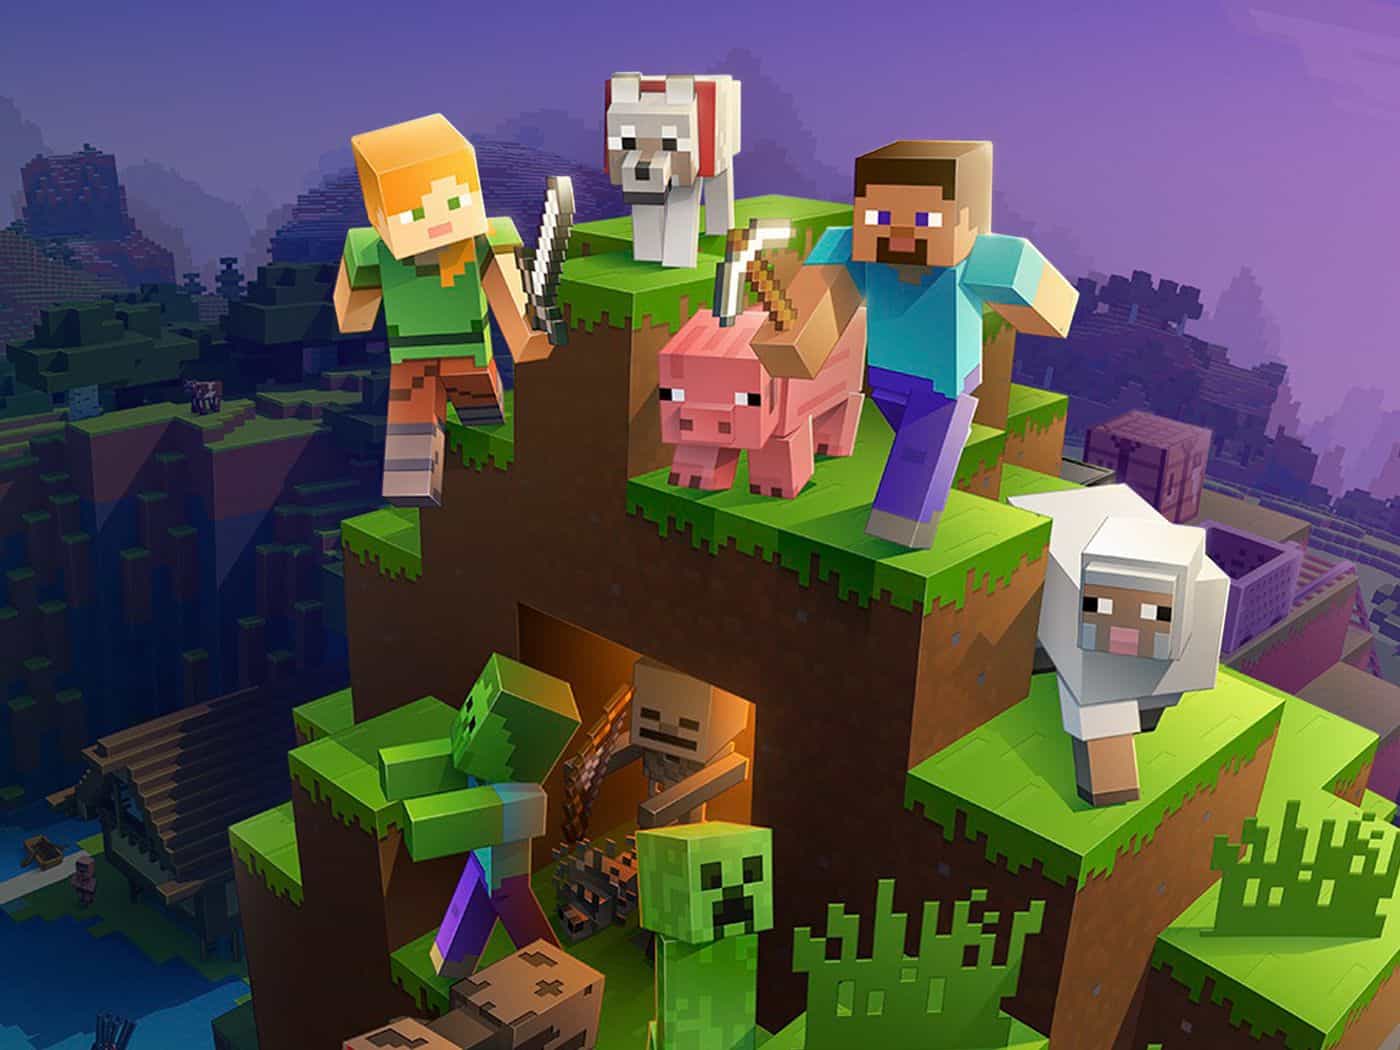 Five questions about Minecraft